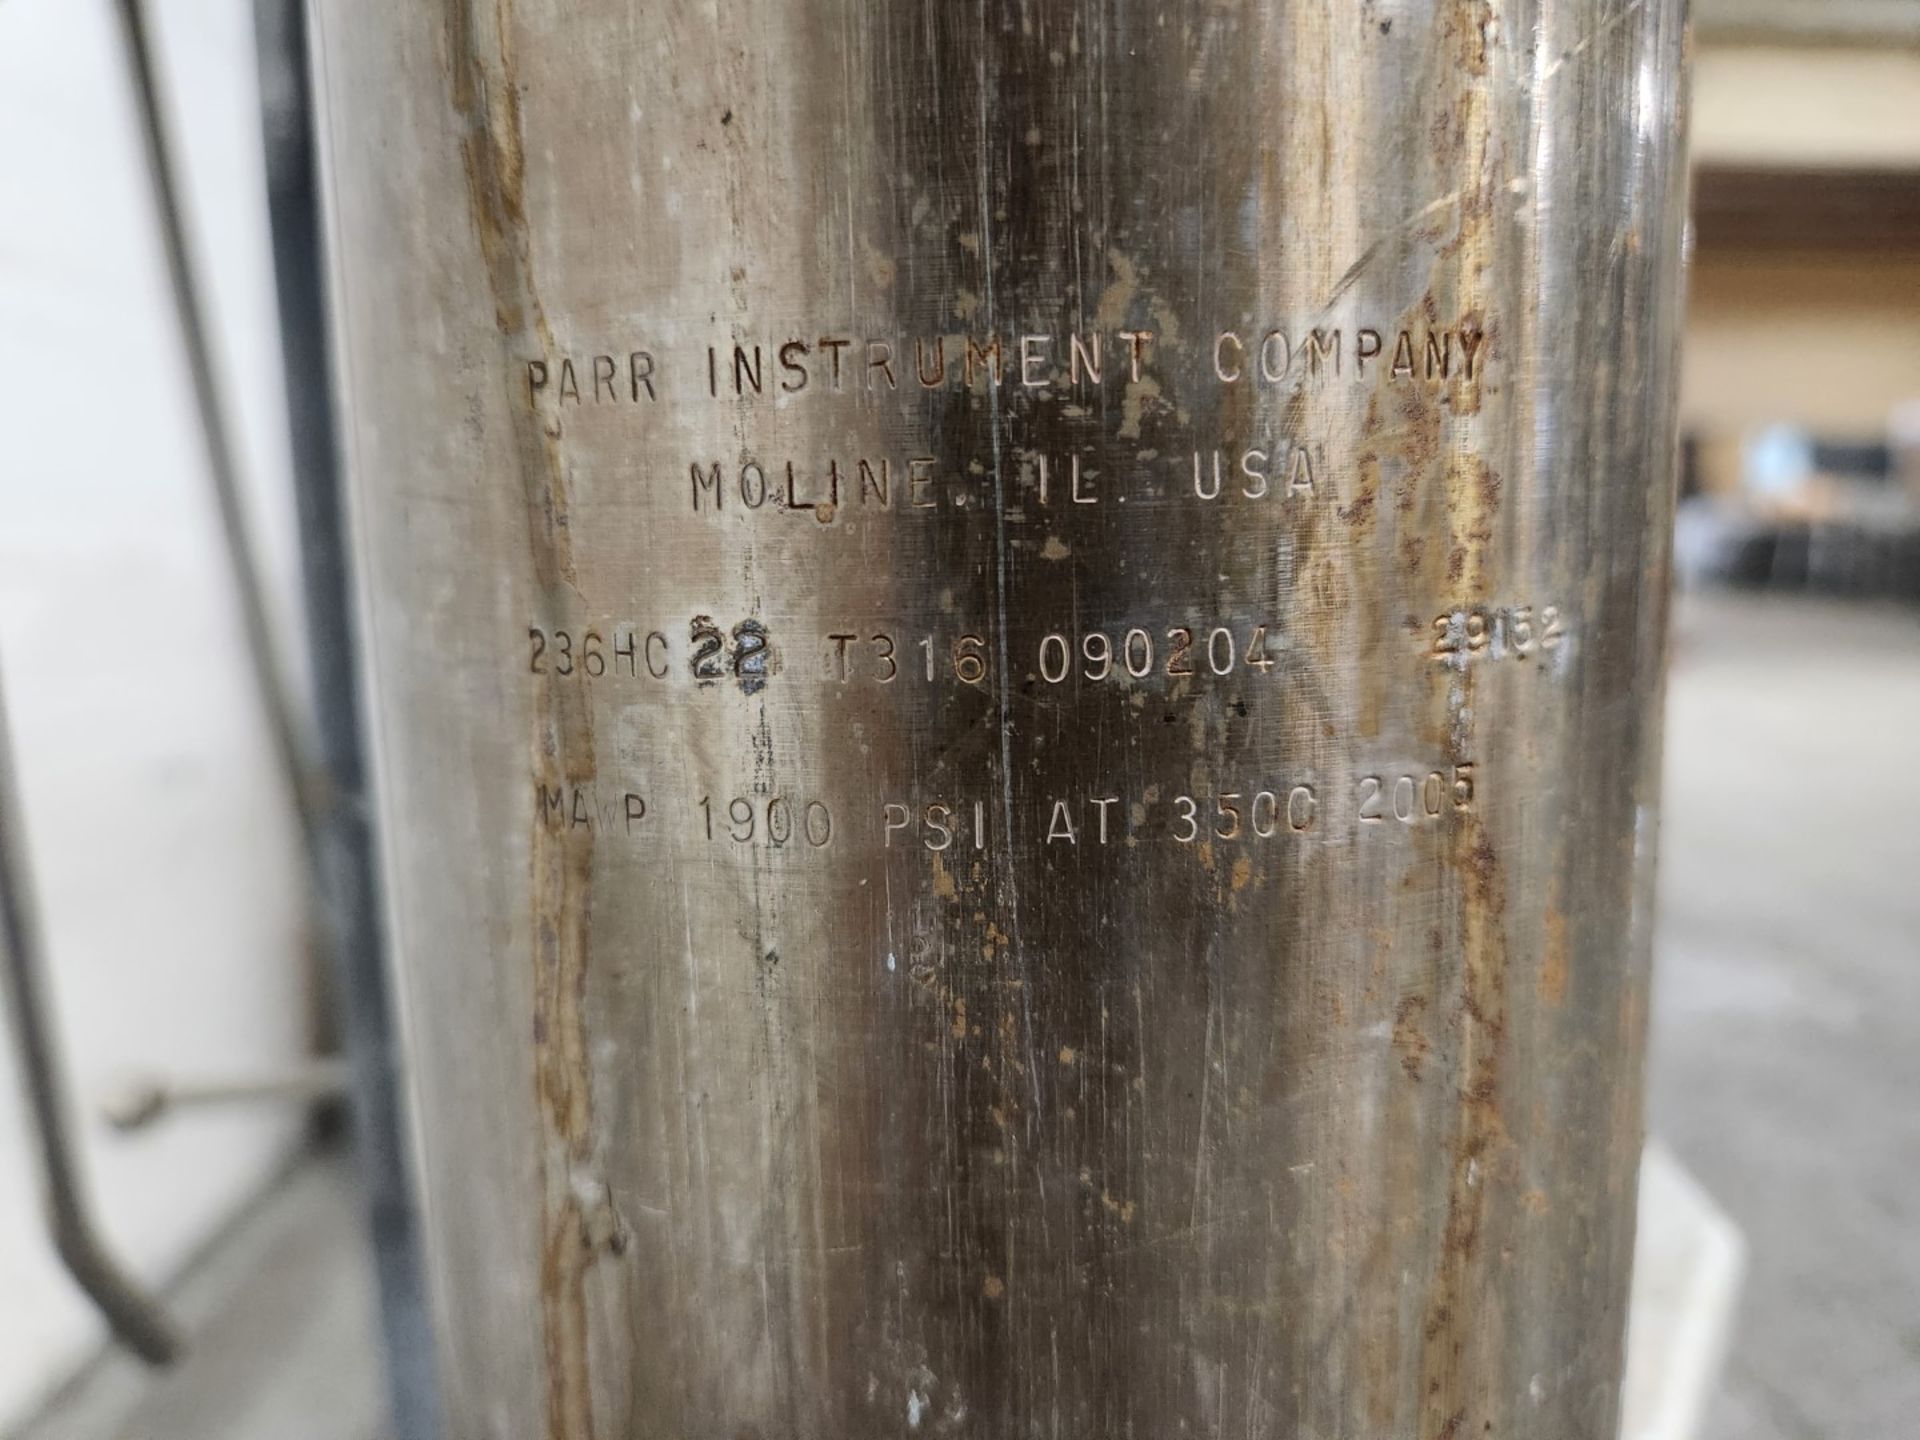 2 Liter Parr Reactor, model 4534, 316 stainless steel construction, arated 1900 psig at 350C, with - Image 7 of 12